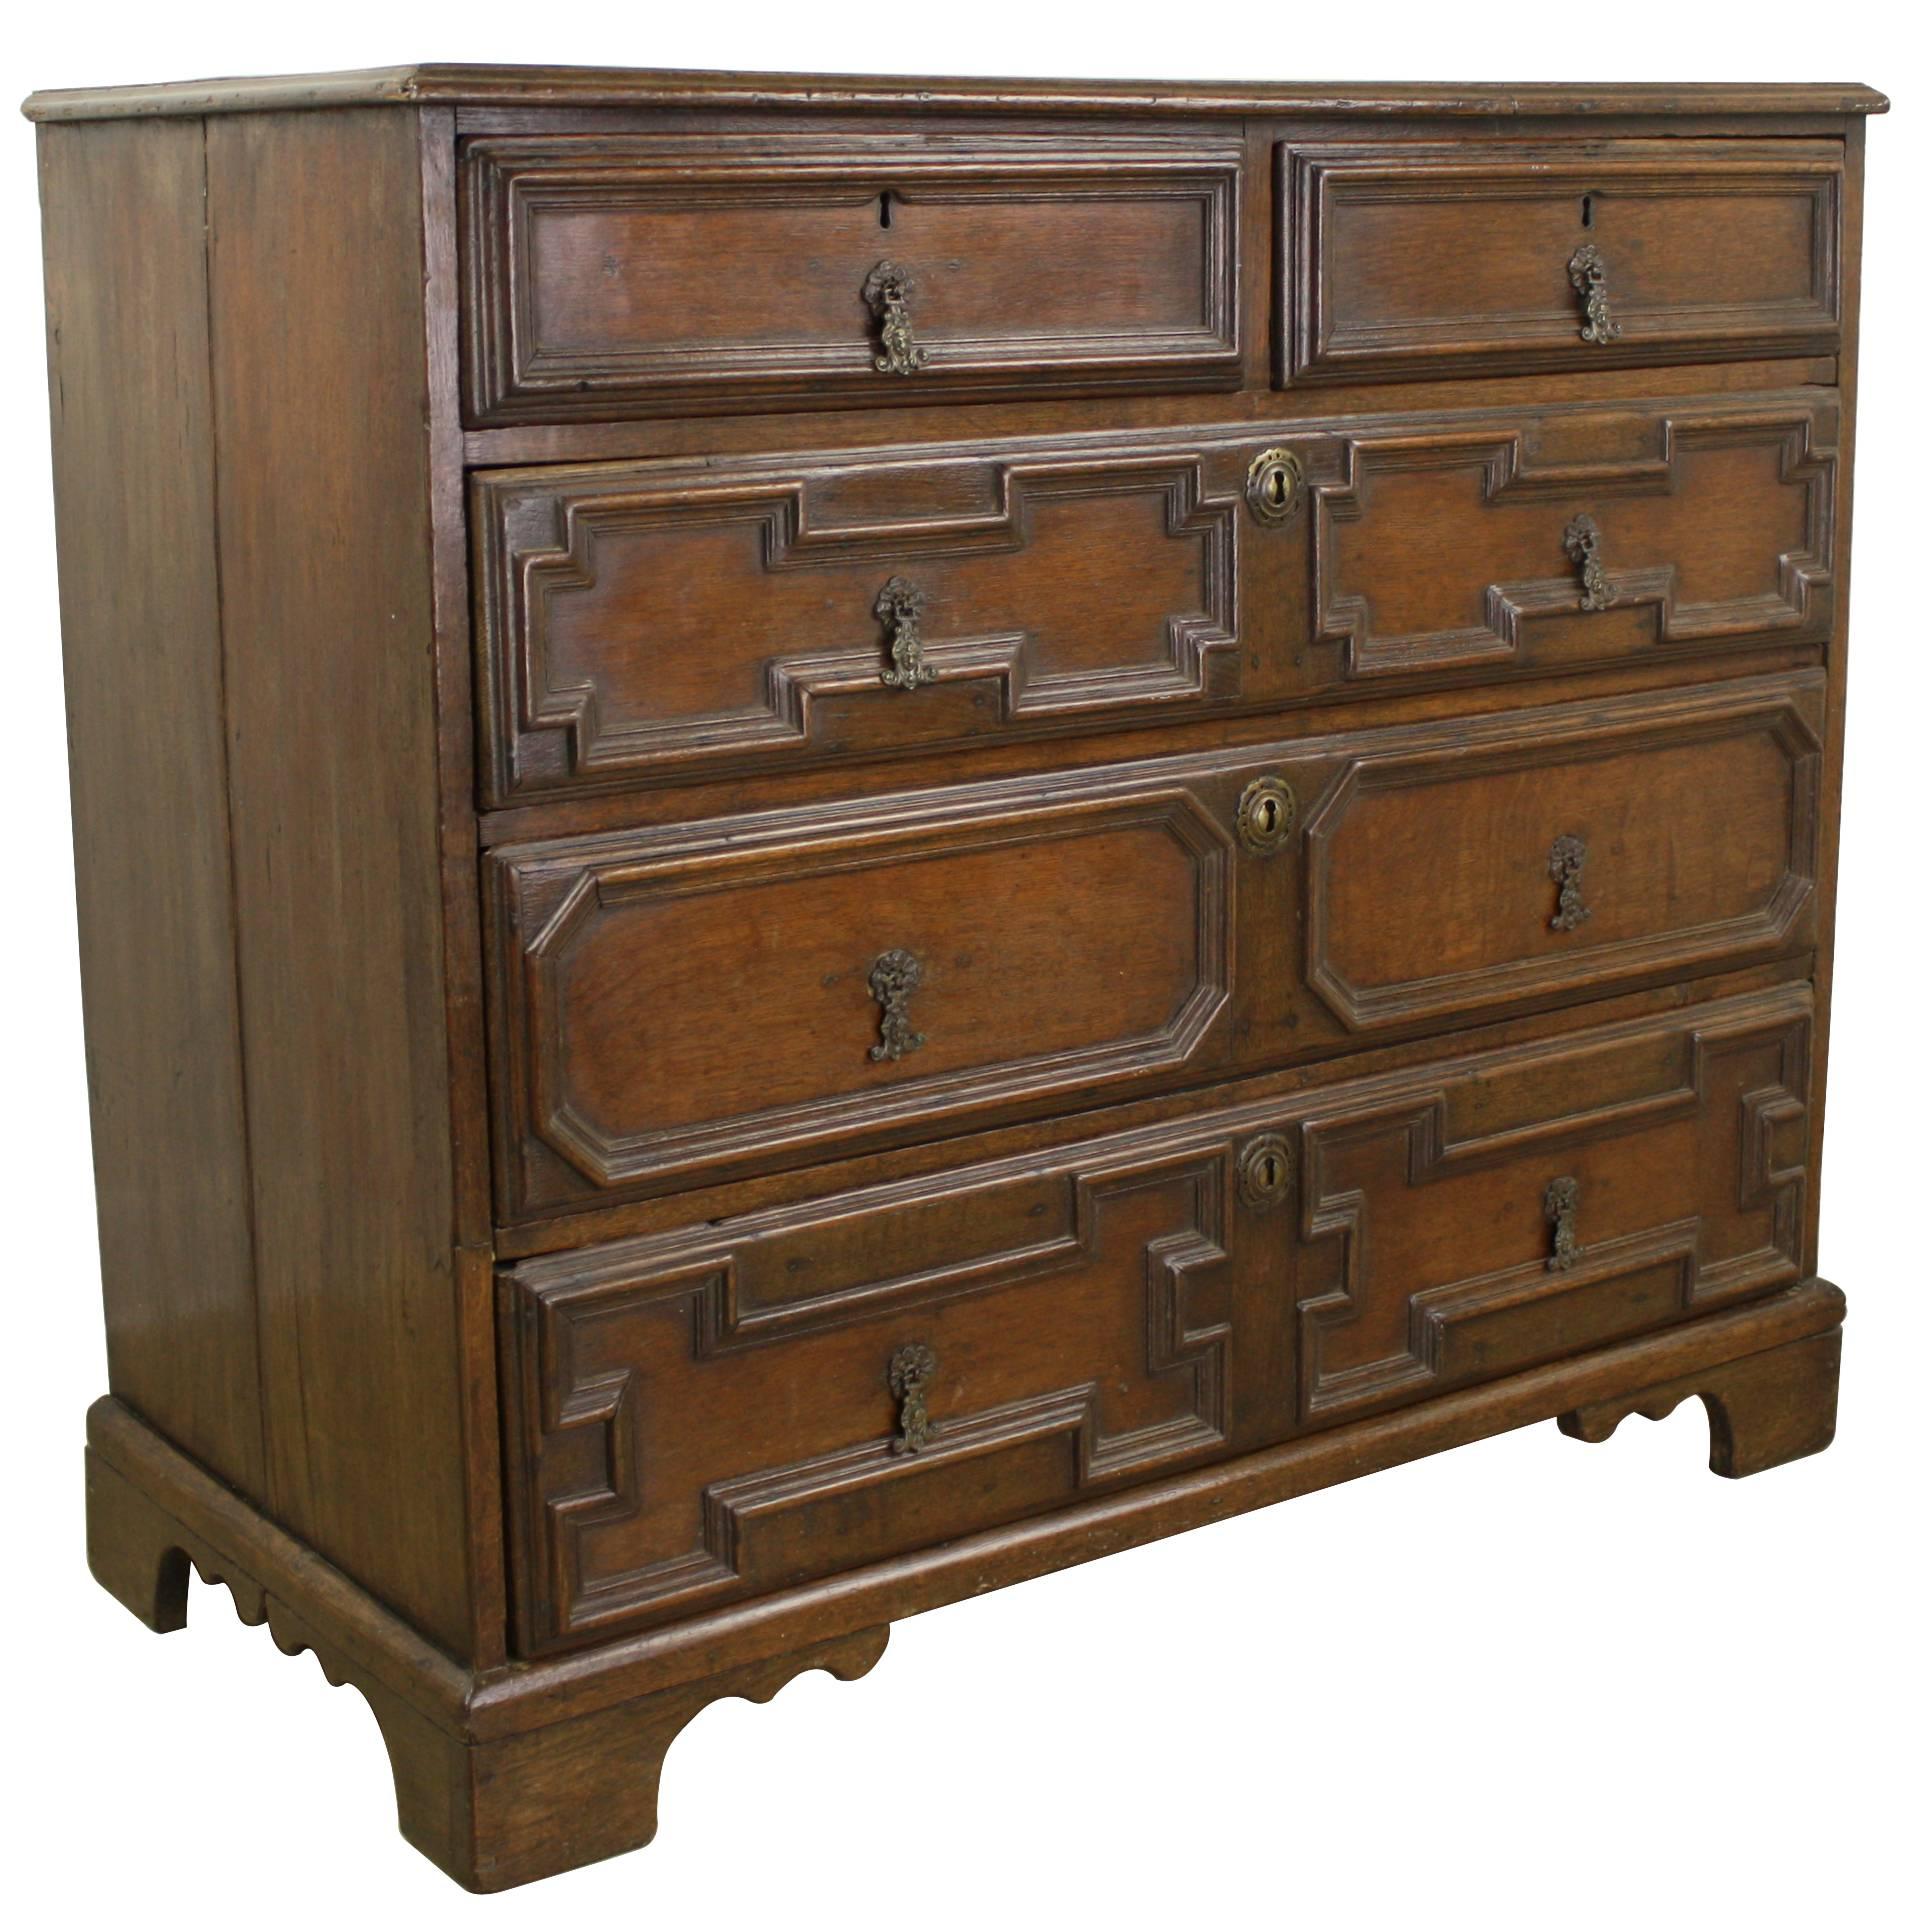 Early Period Oak Chest of Drawers